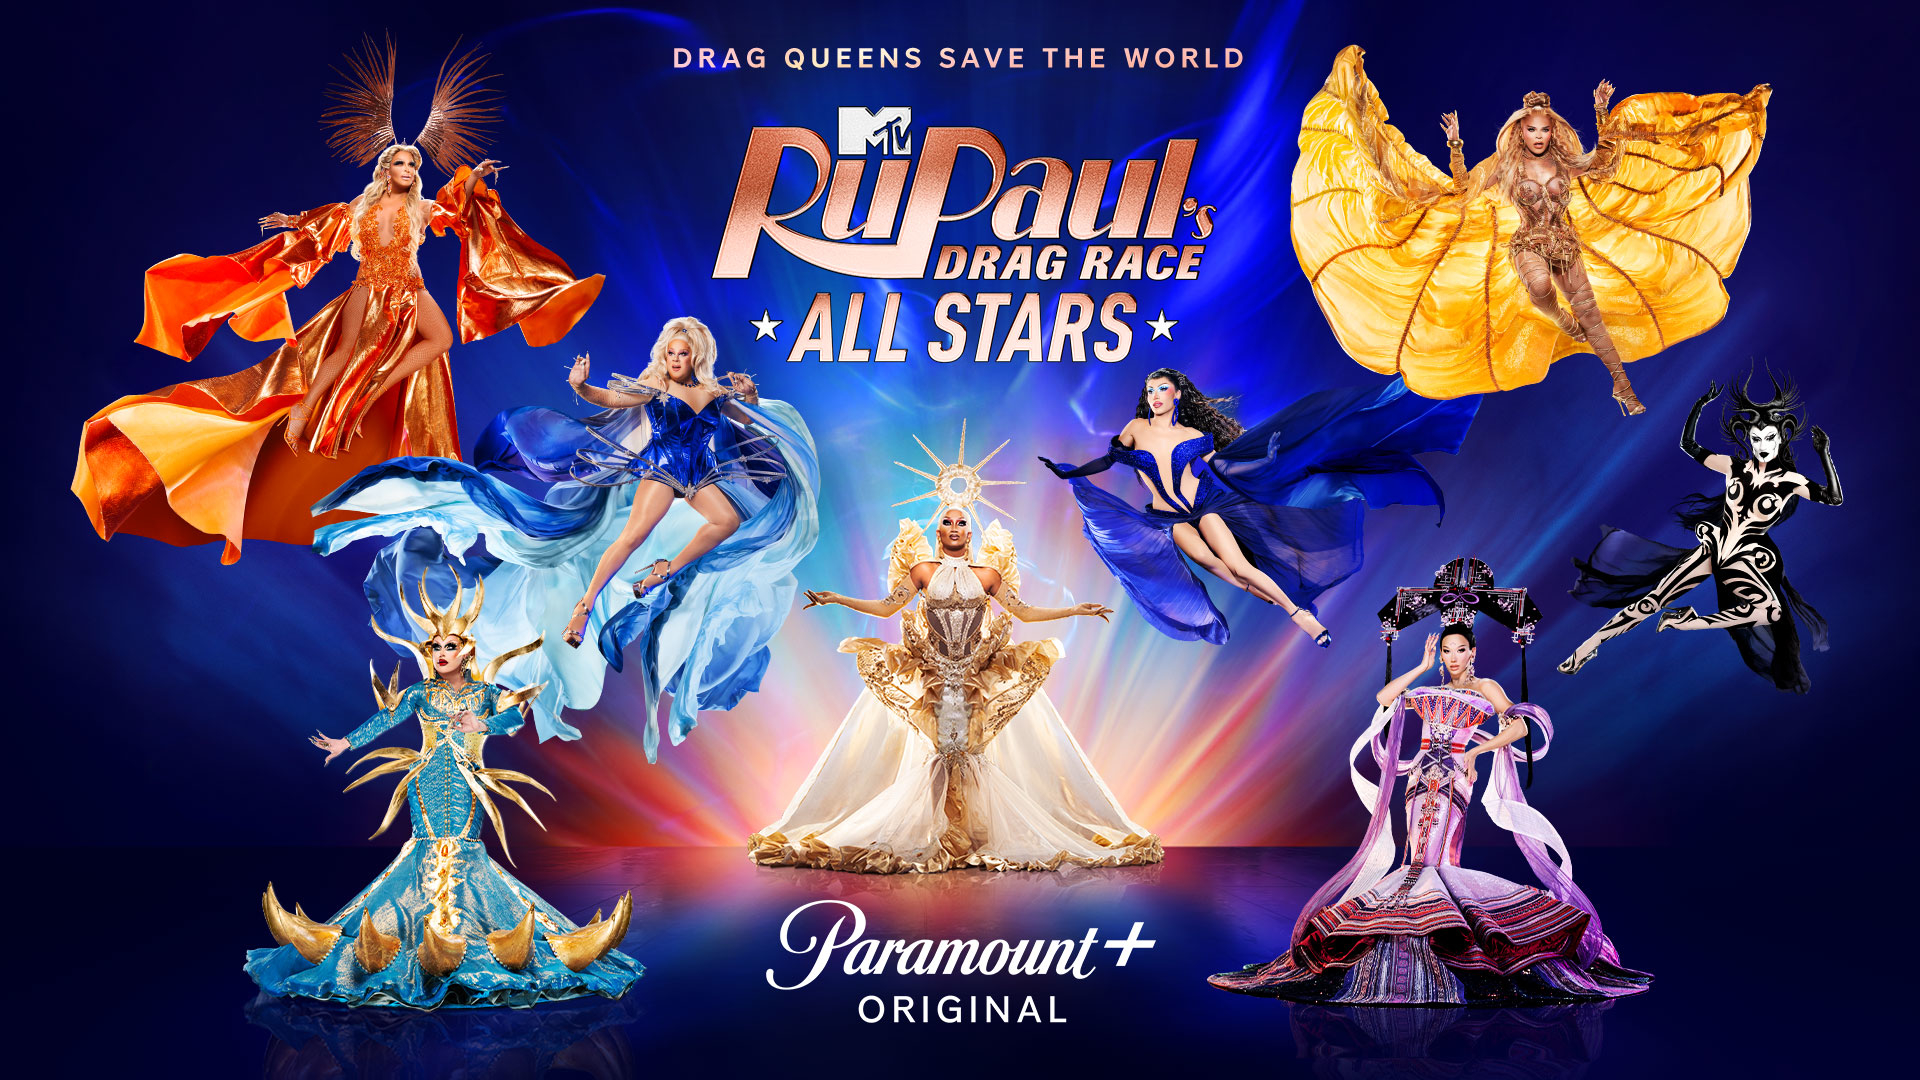 Promotional image for &quot;RuPaul&#x27;s Drag Race All Stars&quot; featuring drag queens in elaborate costumes with a superhero theme